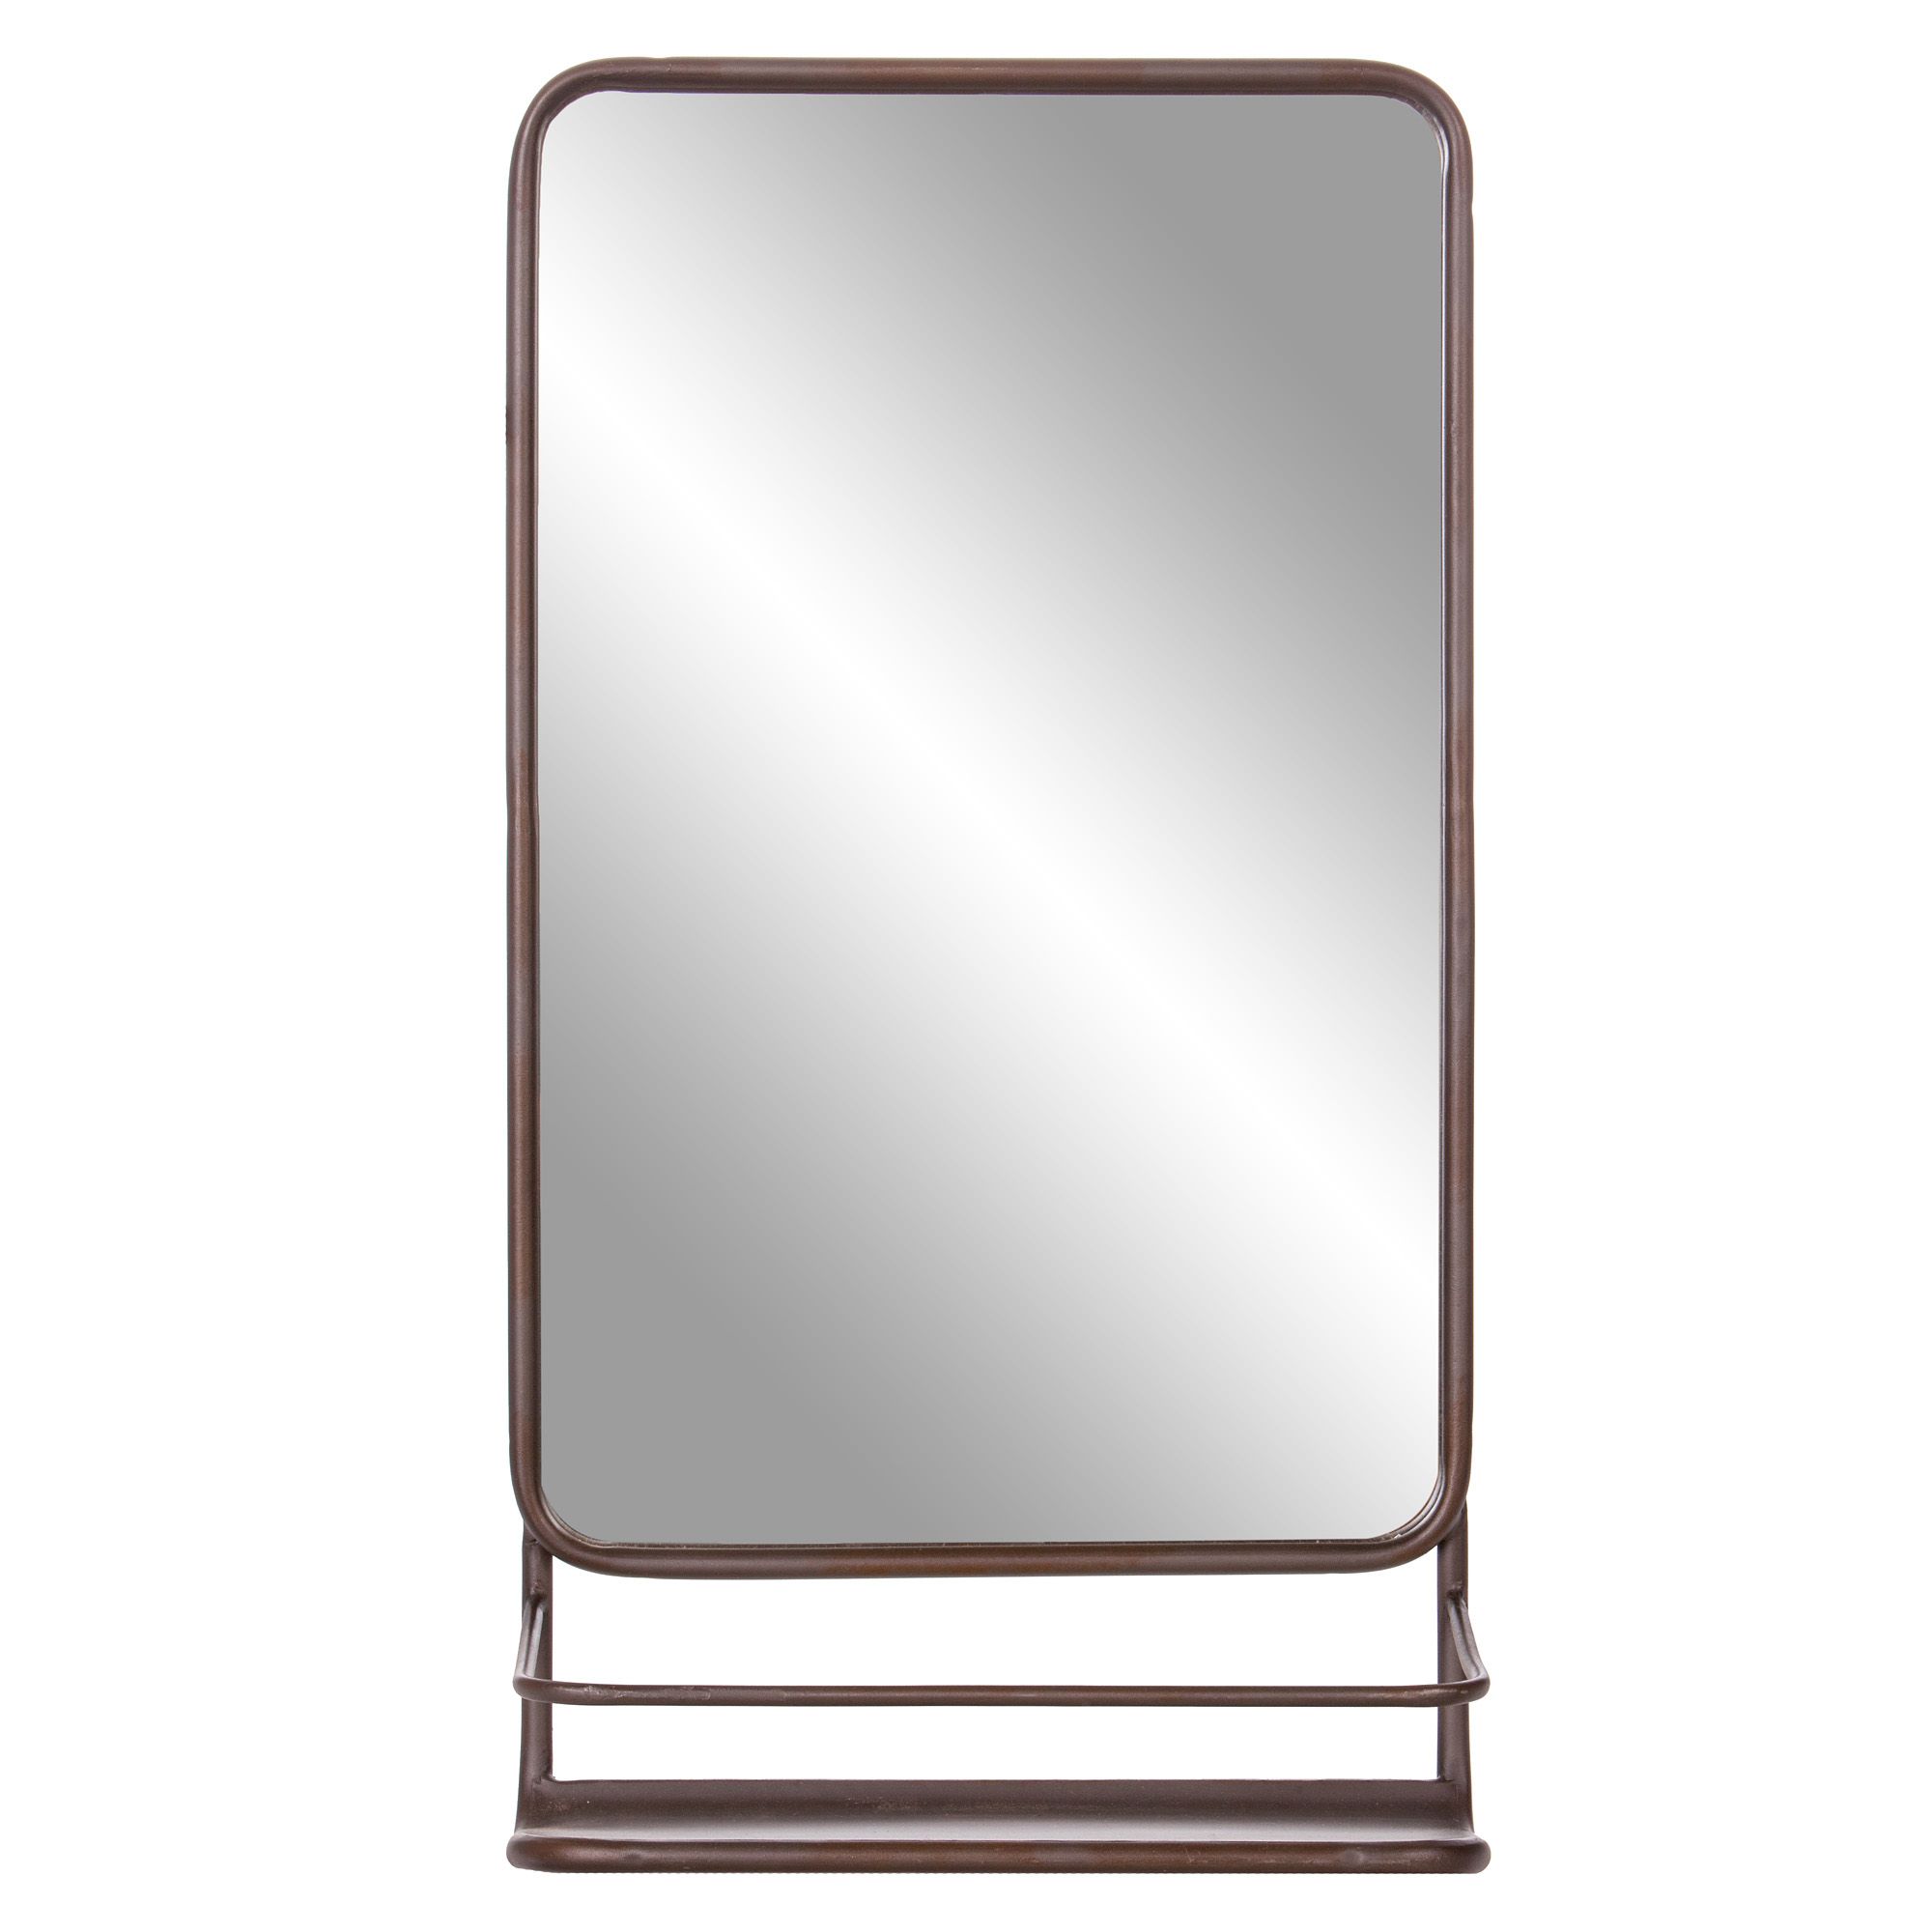 Bronze Metal Wall Accent Mirror With Shelf – Walmart With Woven Bronze Metal Wall Mirrors (View 10 of 15)